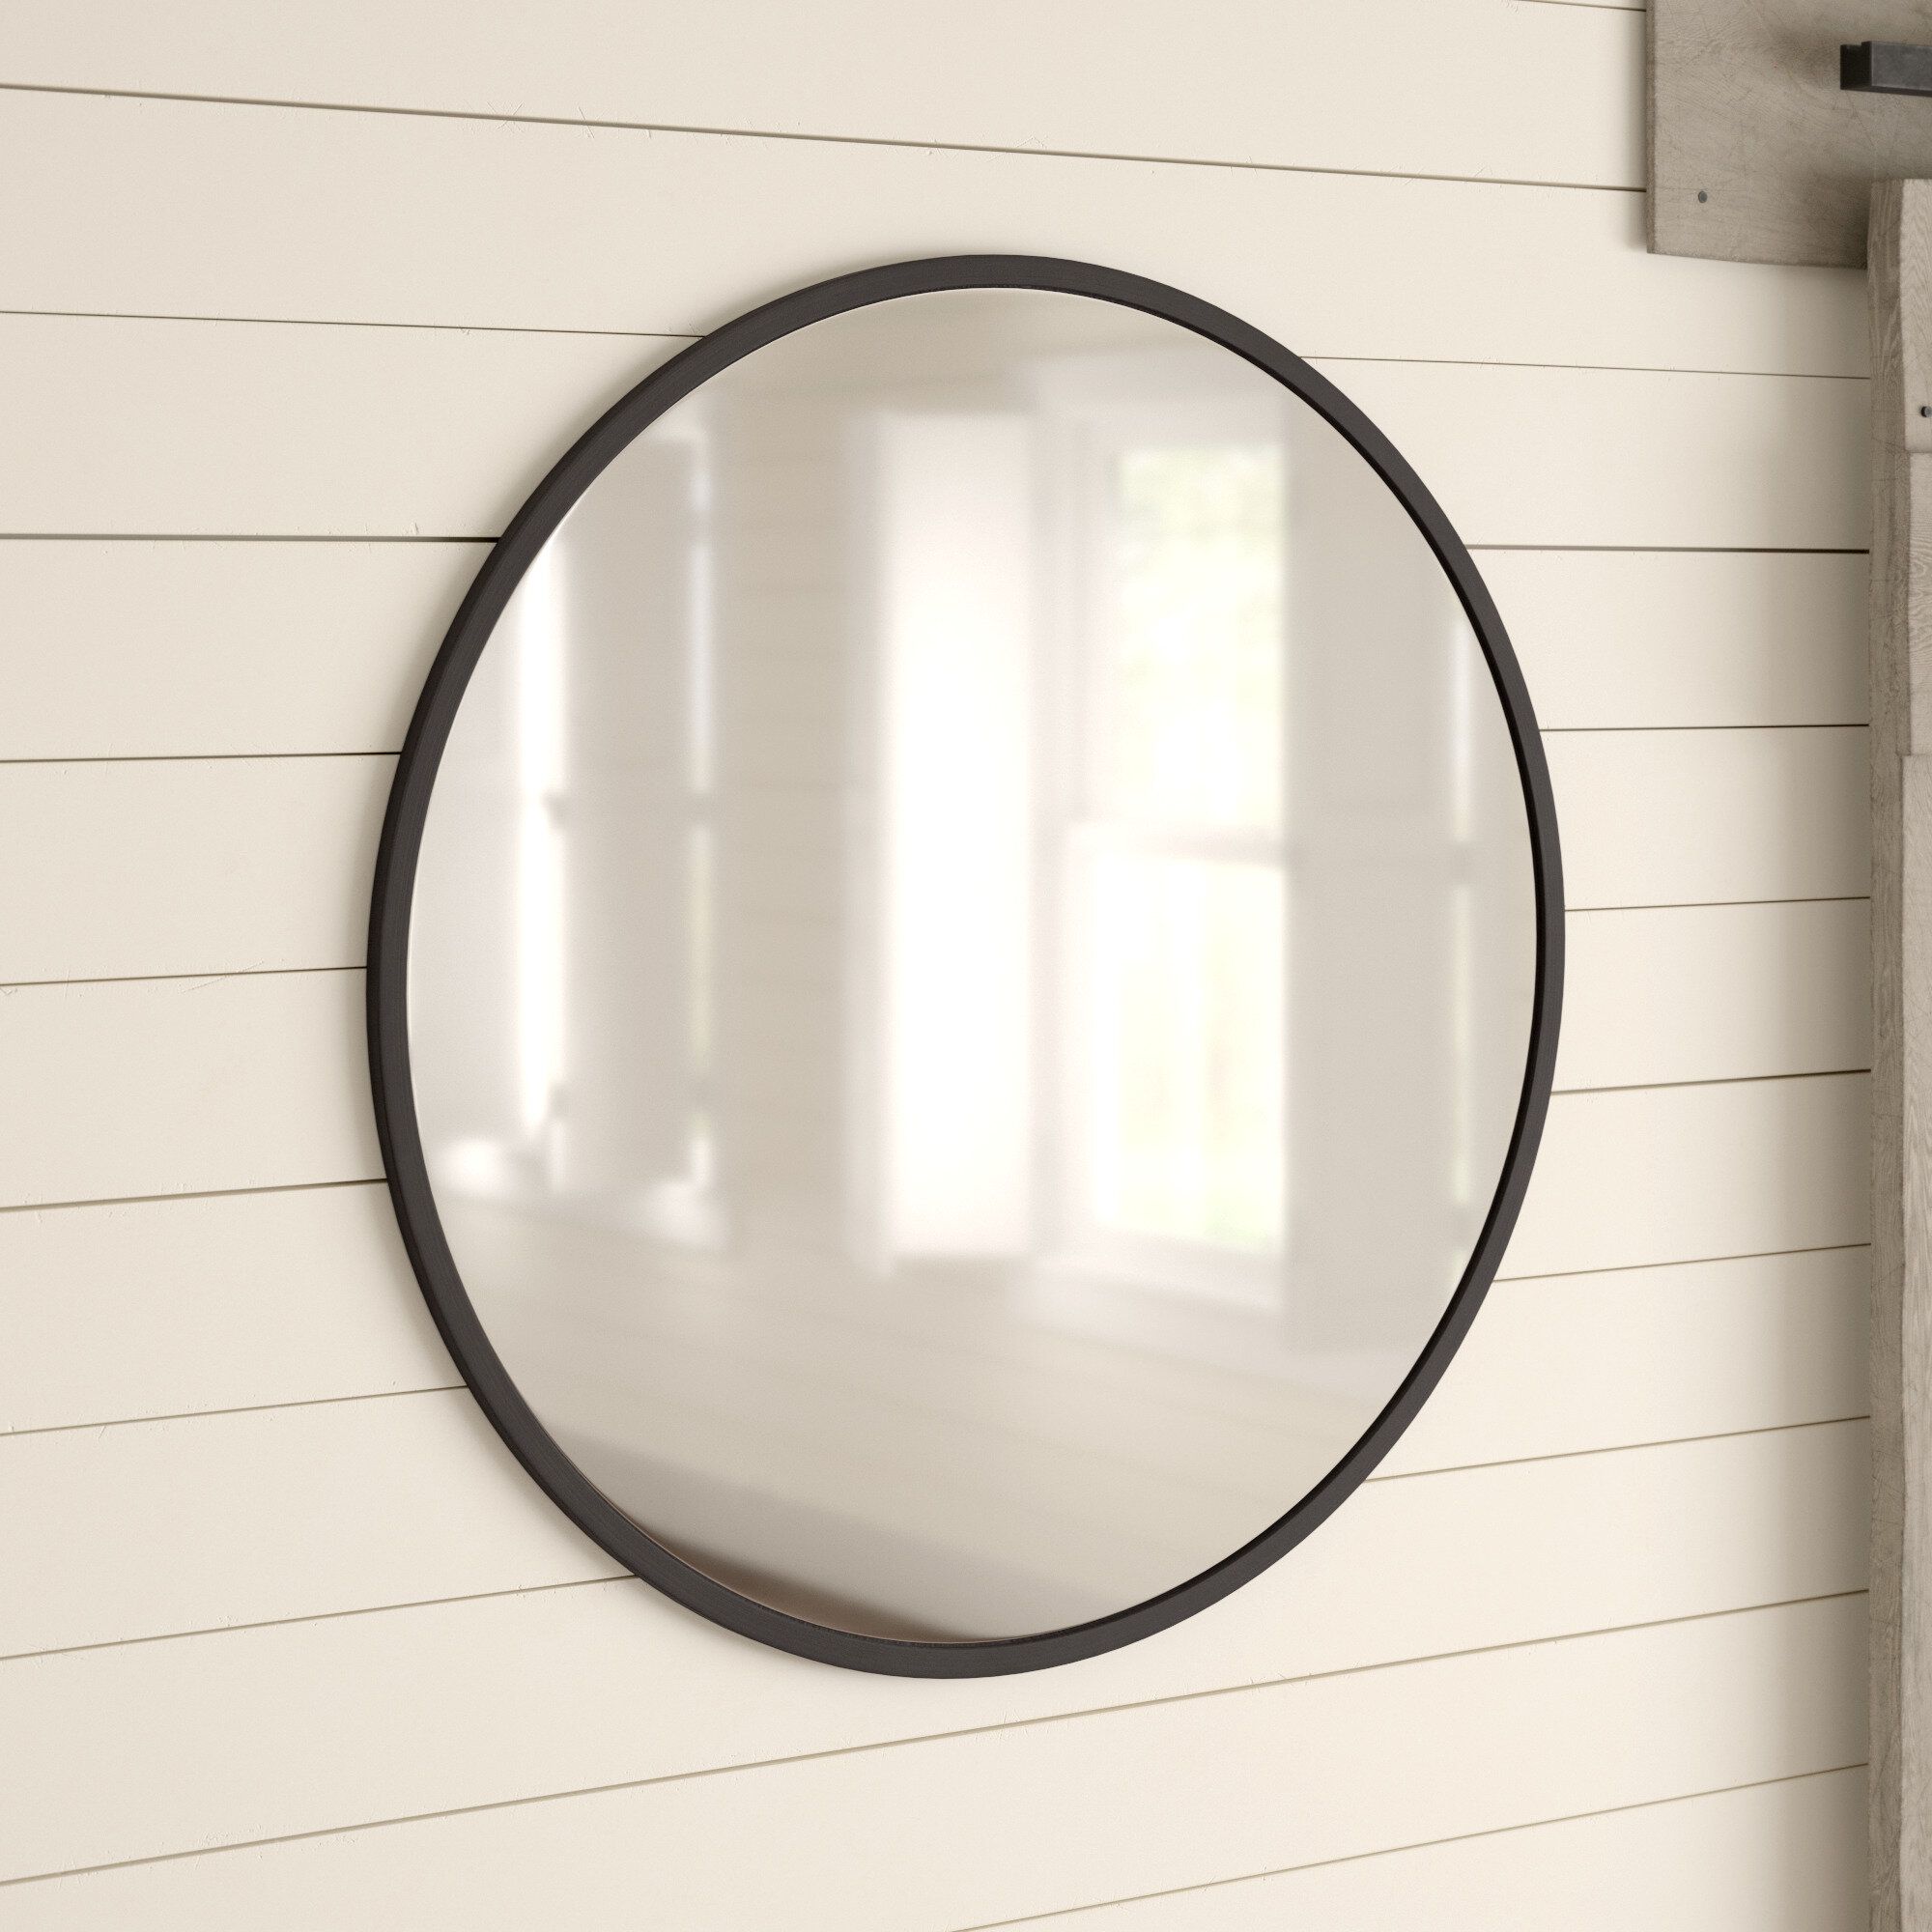 Farmhouse & Rustic Mirrors | Birch Lane For Austin Industrial Accent Mirrors (View 18 of 20)